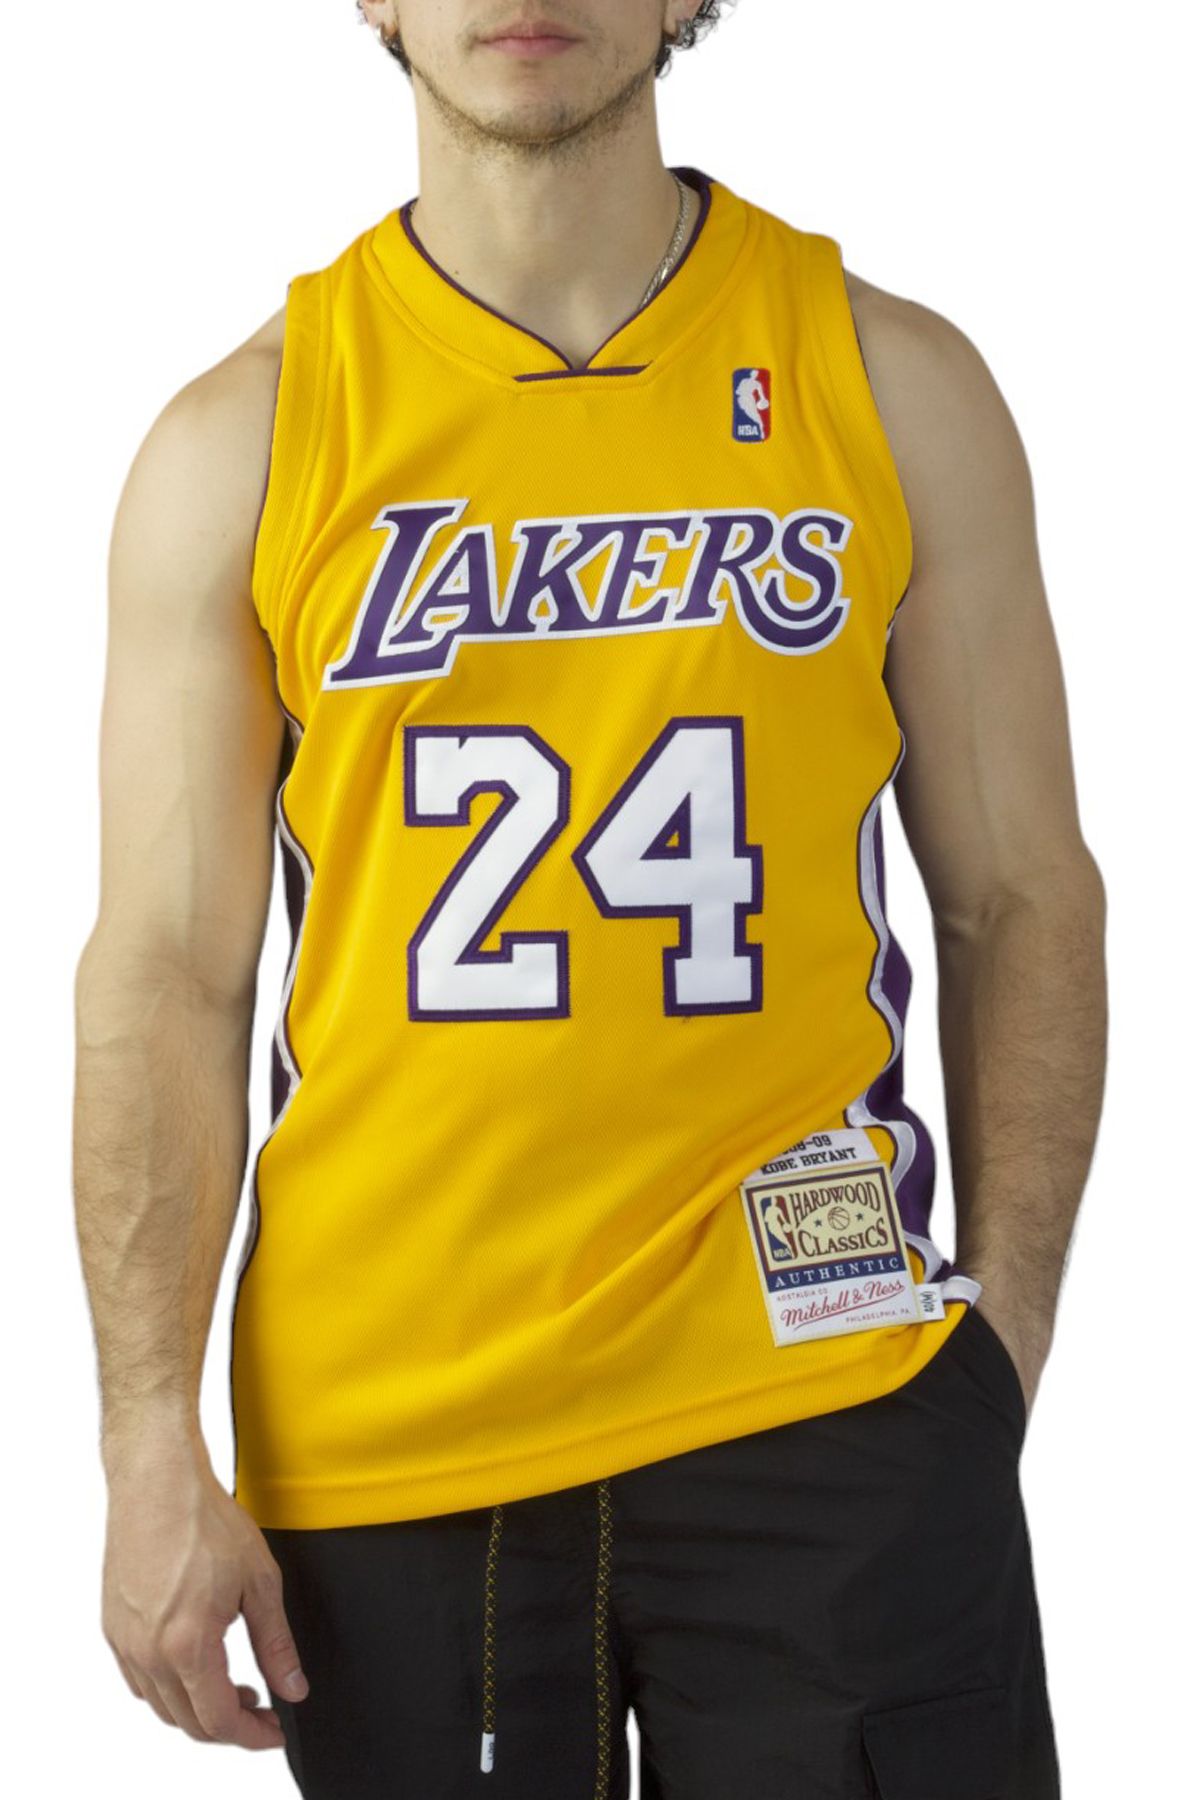 LOS ANGELES LAKERS KOBE BRYANT 2008-09 AUTHENTIC JERSEY  AJY4CP19009-LALLTGD08KBR